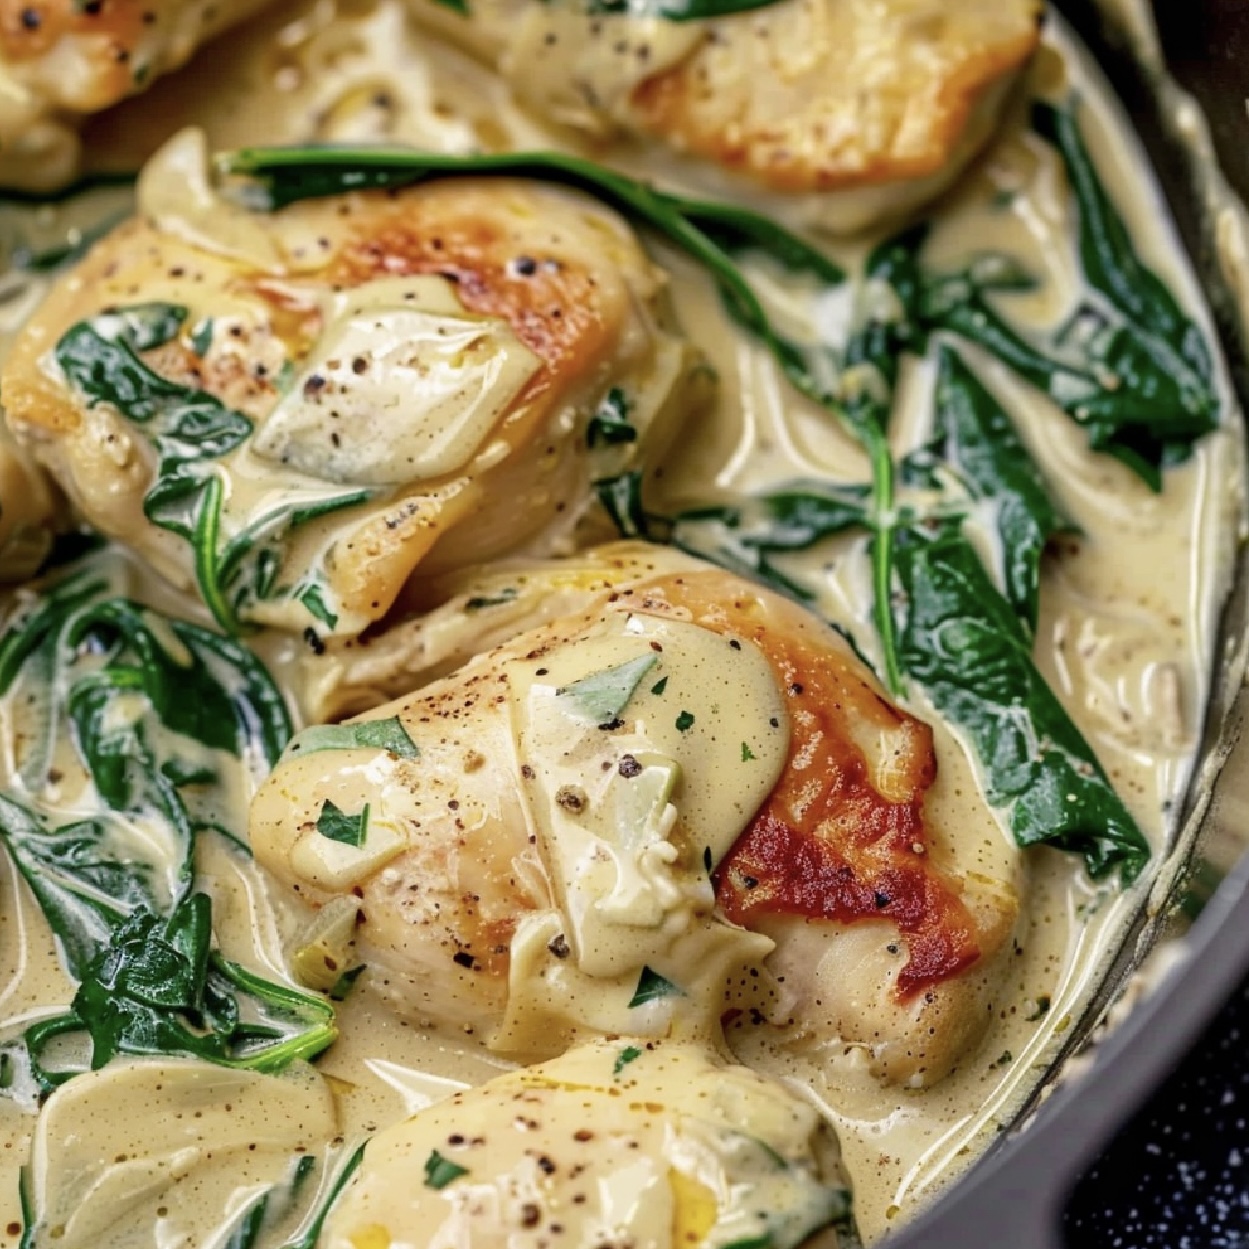 Enjoy a healthy twist on comfort food with this slow cooker spinach artichoke chicken, perfect for any night.